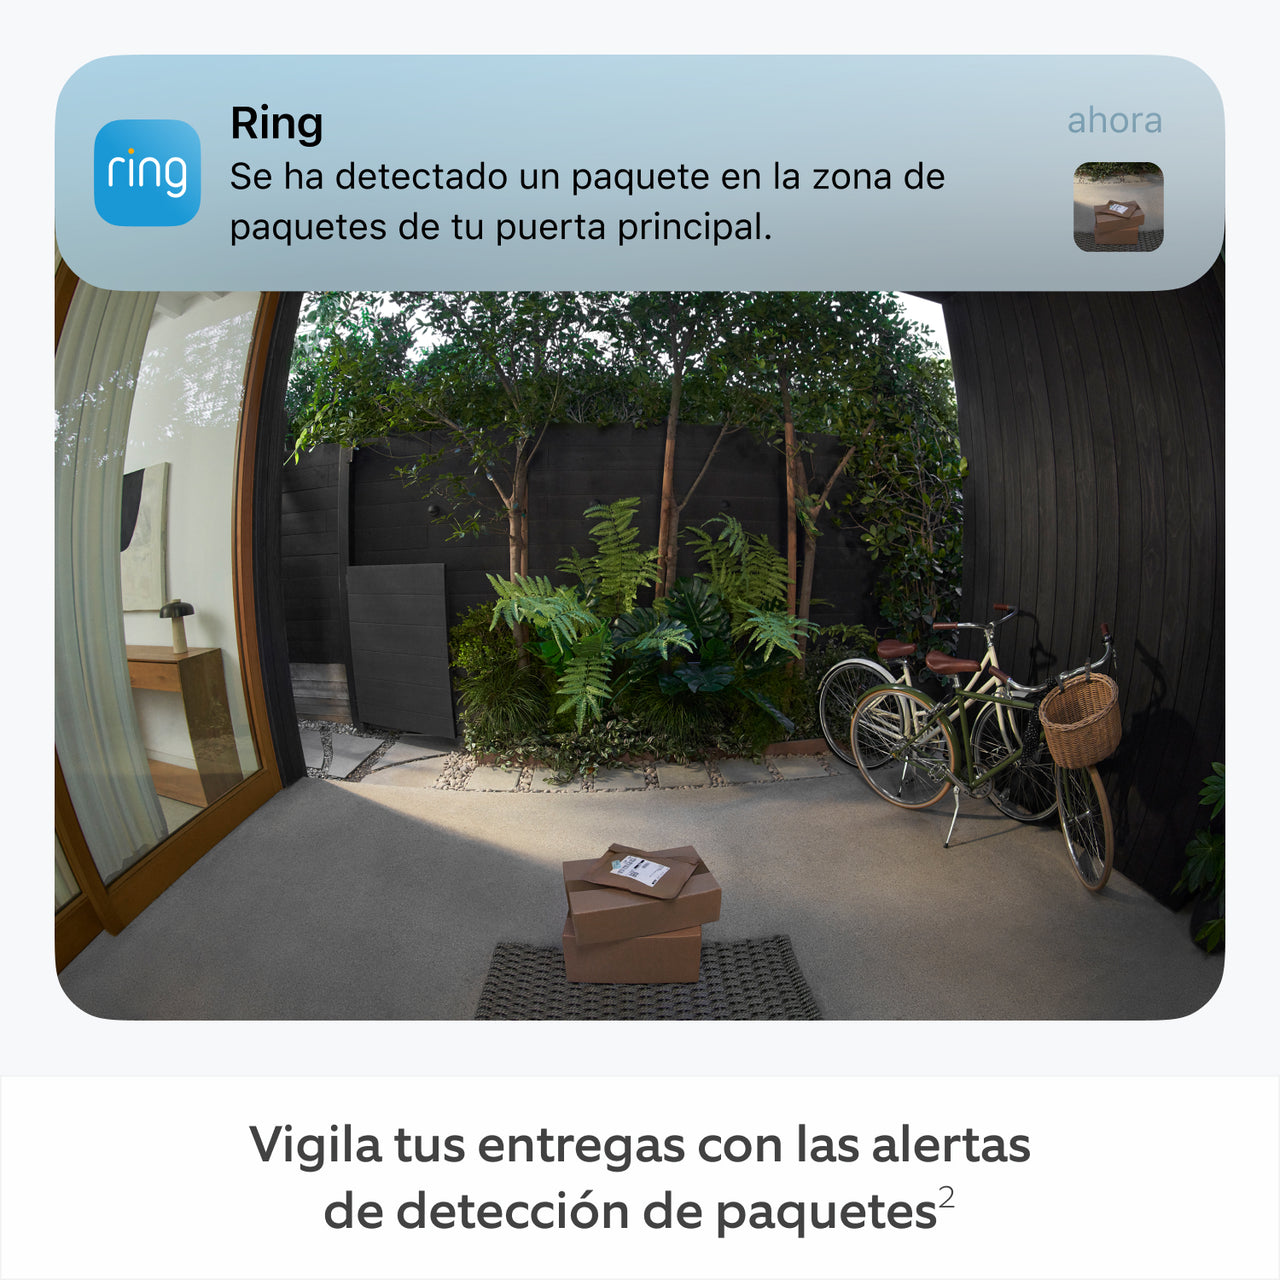 files/ring_battery-video-doorbell-pro_sn_05_package-detection_es_1500x1500_6c186ab1-9fbd-4611-929a-729ad979137e.jpg